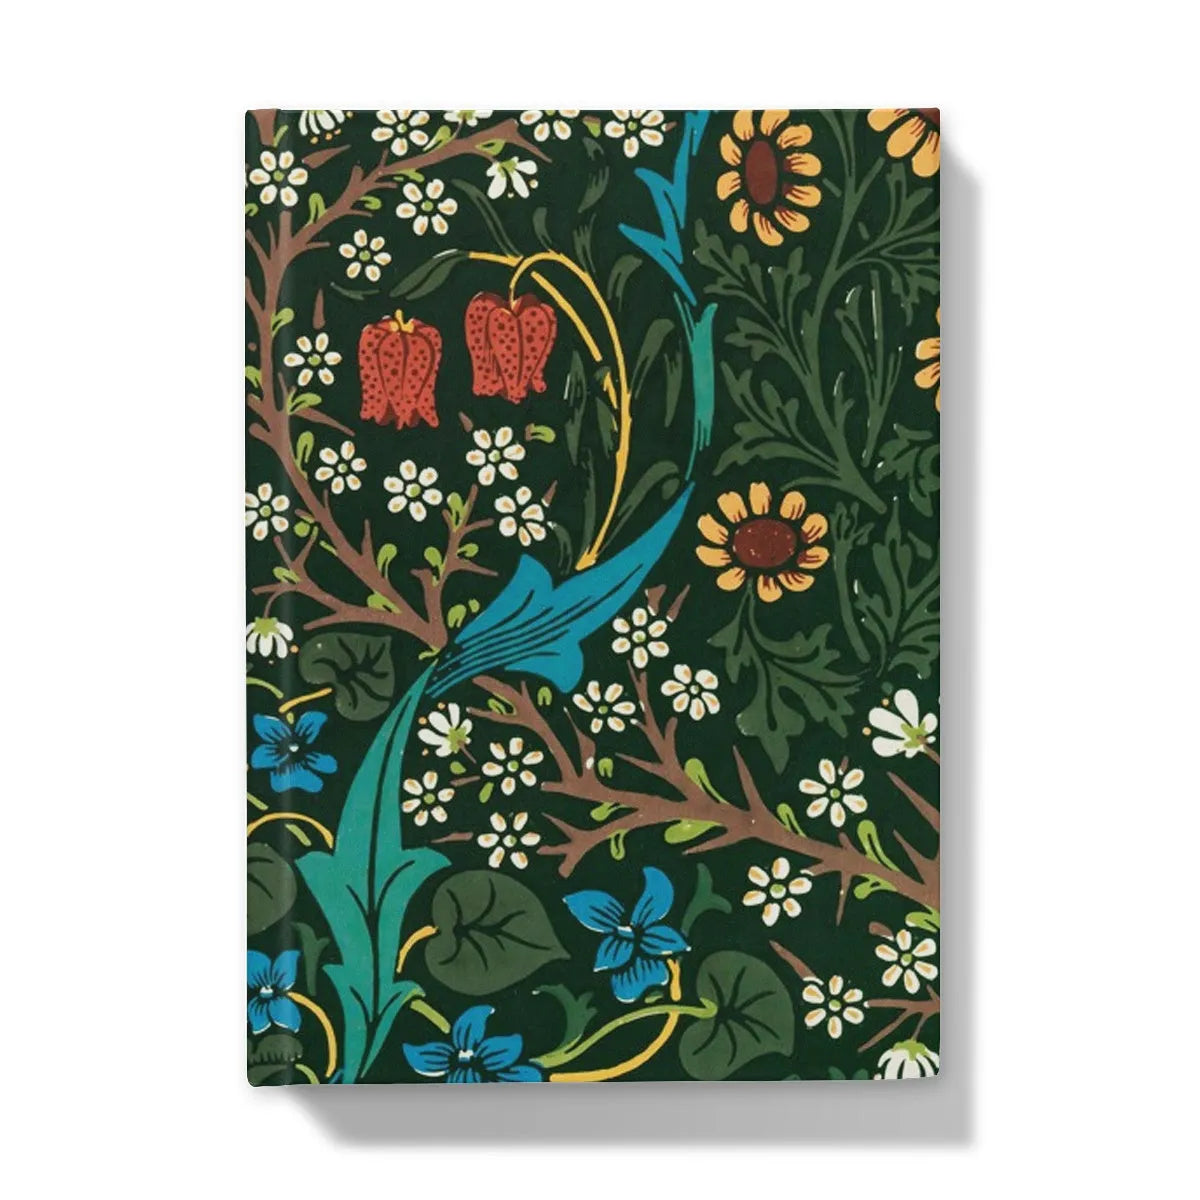 Blackthorn Hawthorn By William Morris Hardback Journal - 5’x7’ / 5’ x 7’ - Lined Paper - Notebooks & Notepads